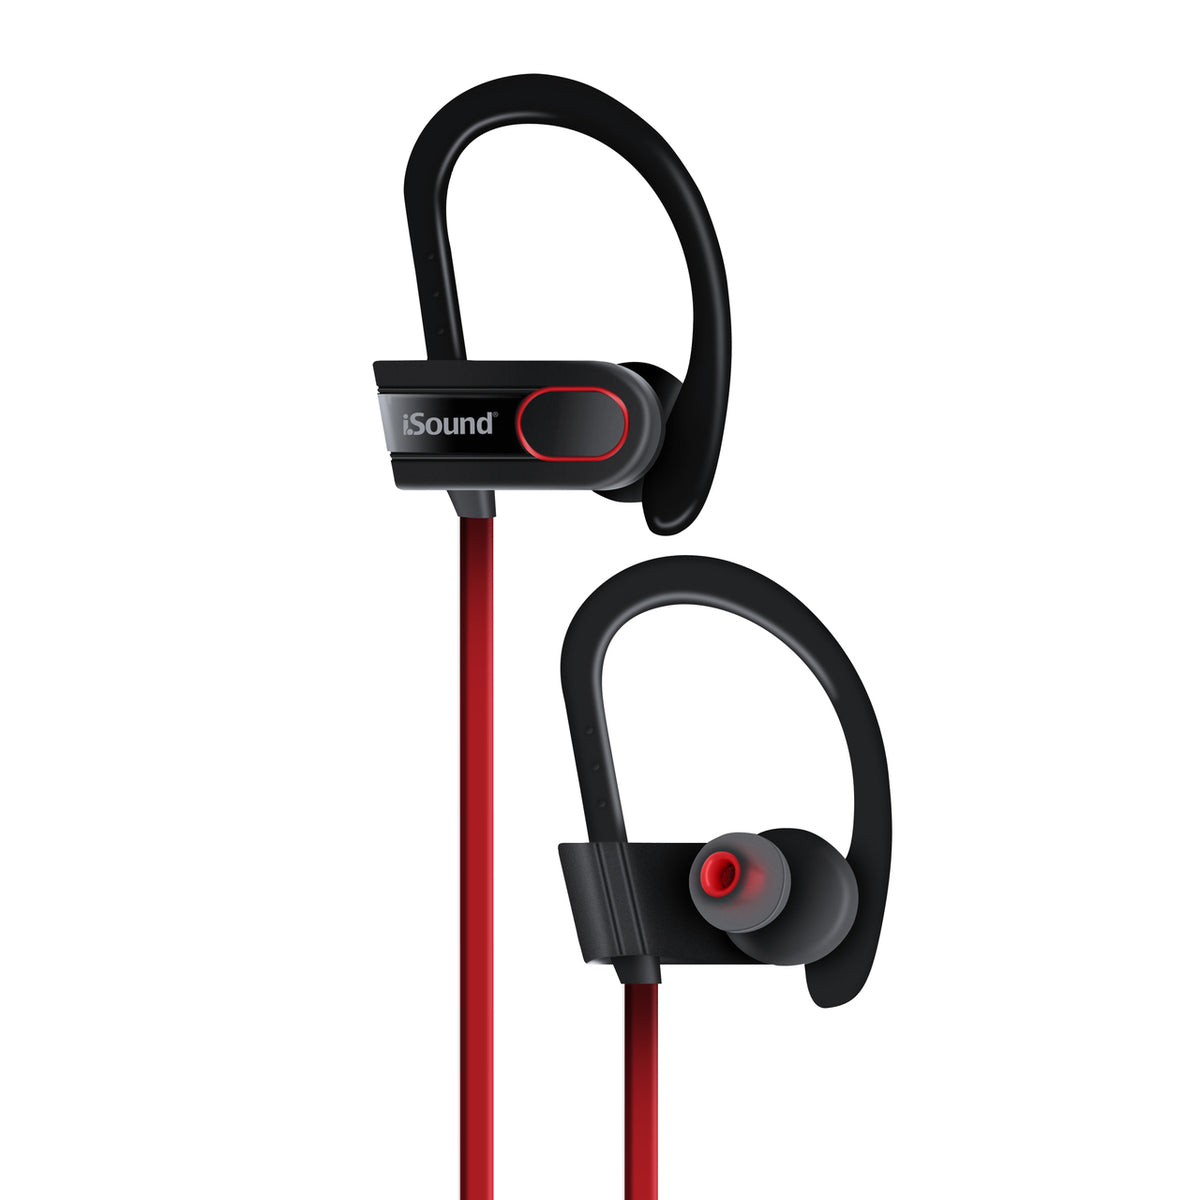 iSound DGHP-5622 Sport Tone Dynamic BT Earbuds Red/Black